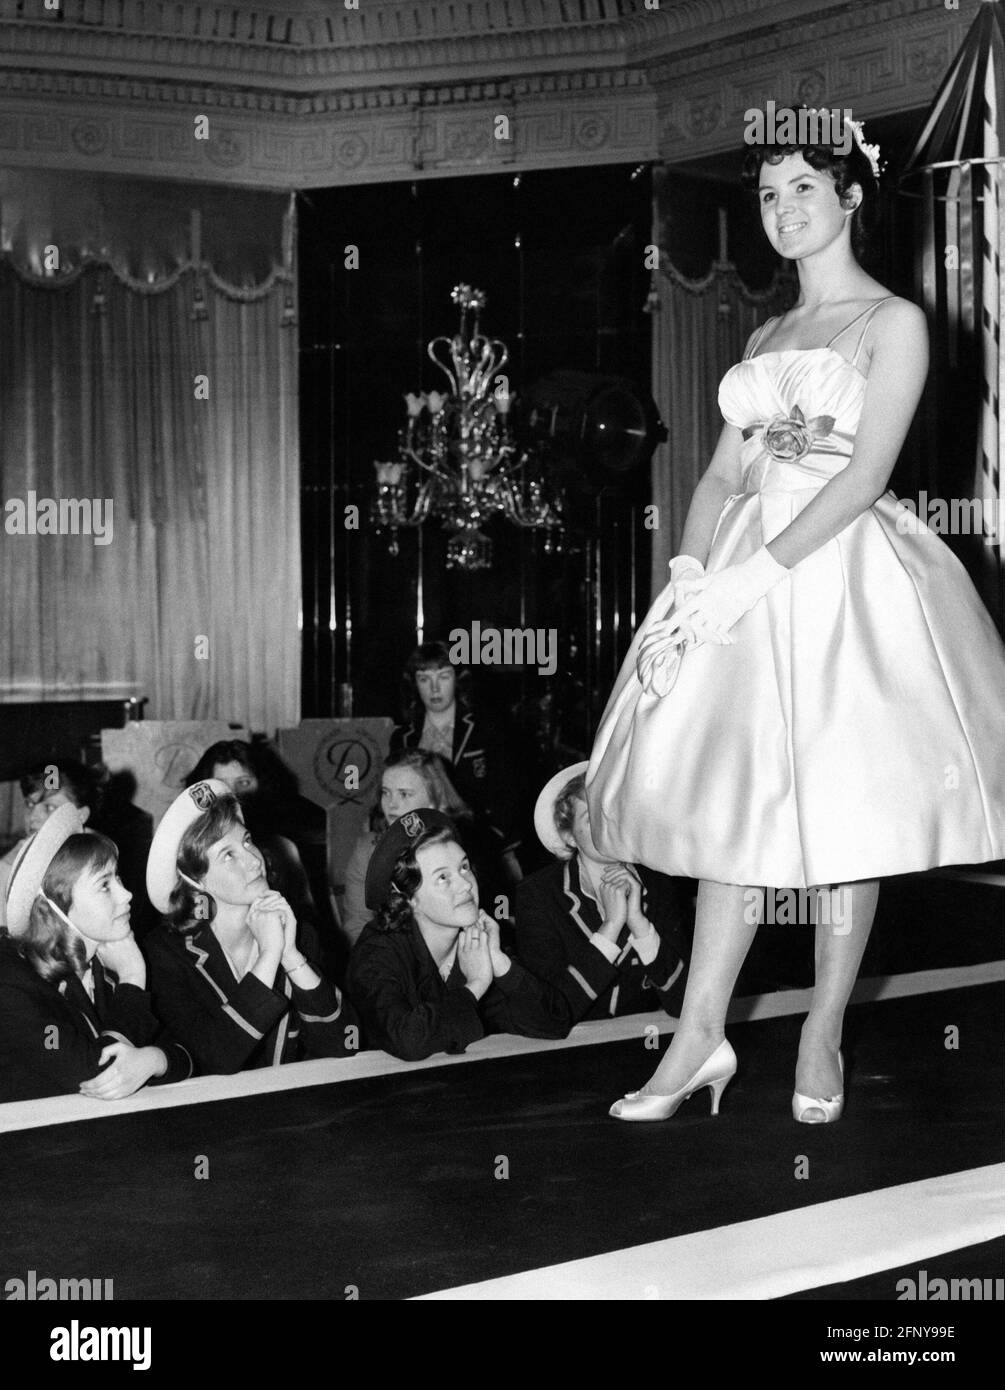 fashion, 1950s, ladies' fashion, fashion shows, acetate party dress, presentation at Dorchester Hotel, ADDITIONAL-RIGHTS-CLEARANCE-INFO-NOT-AVAILABLE Stock Photo